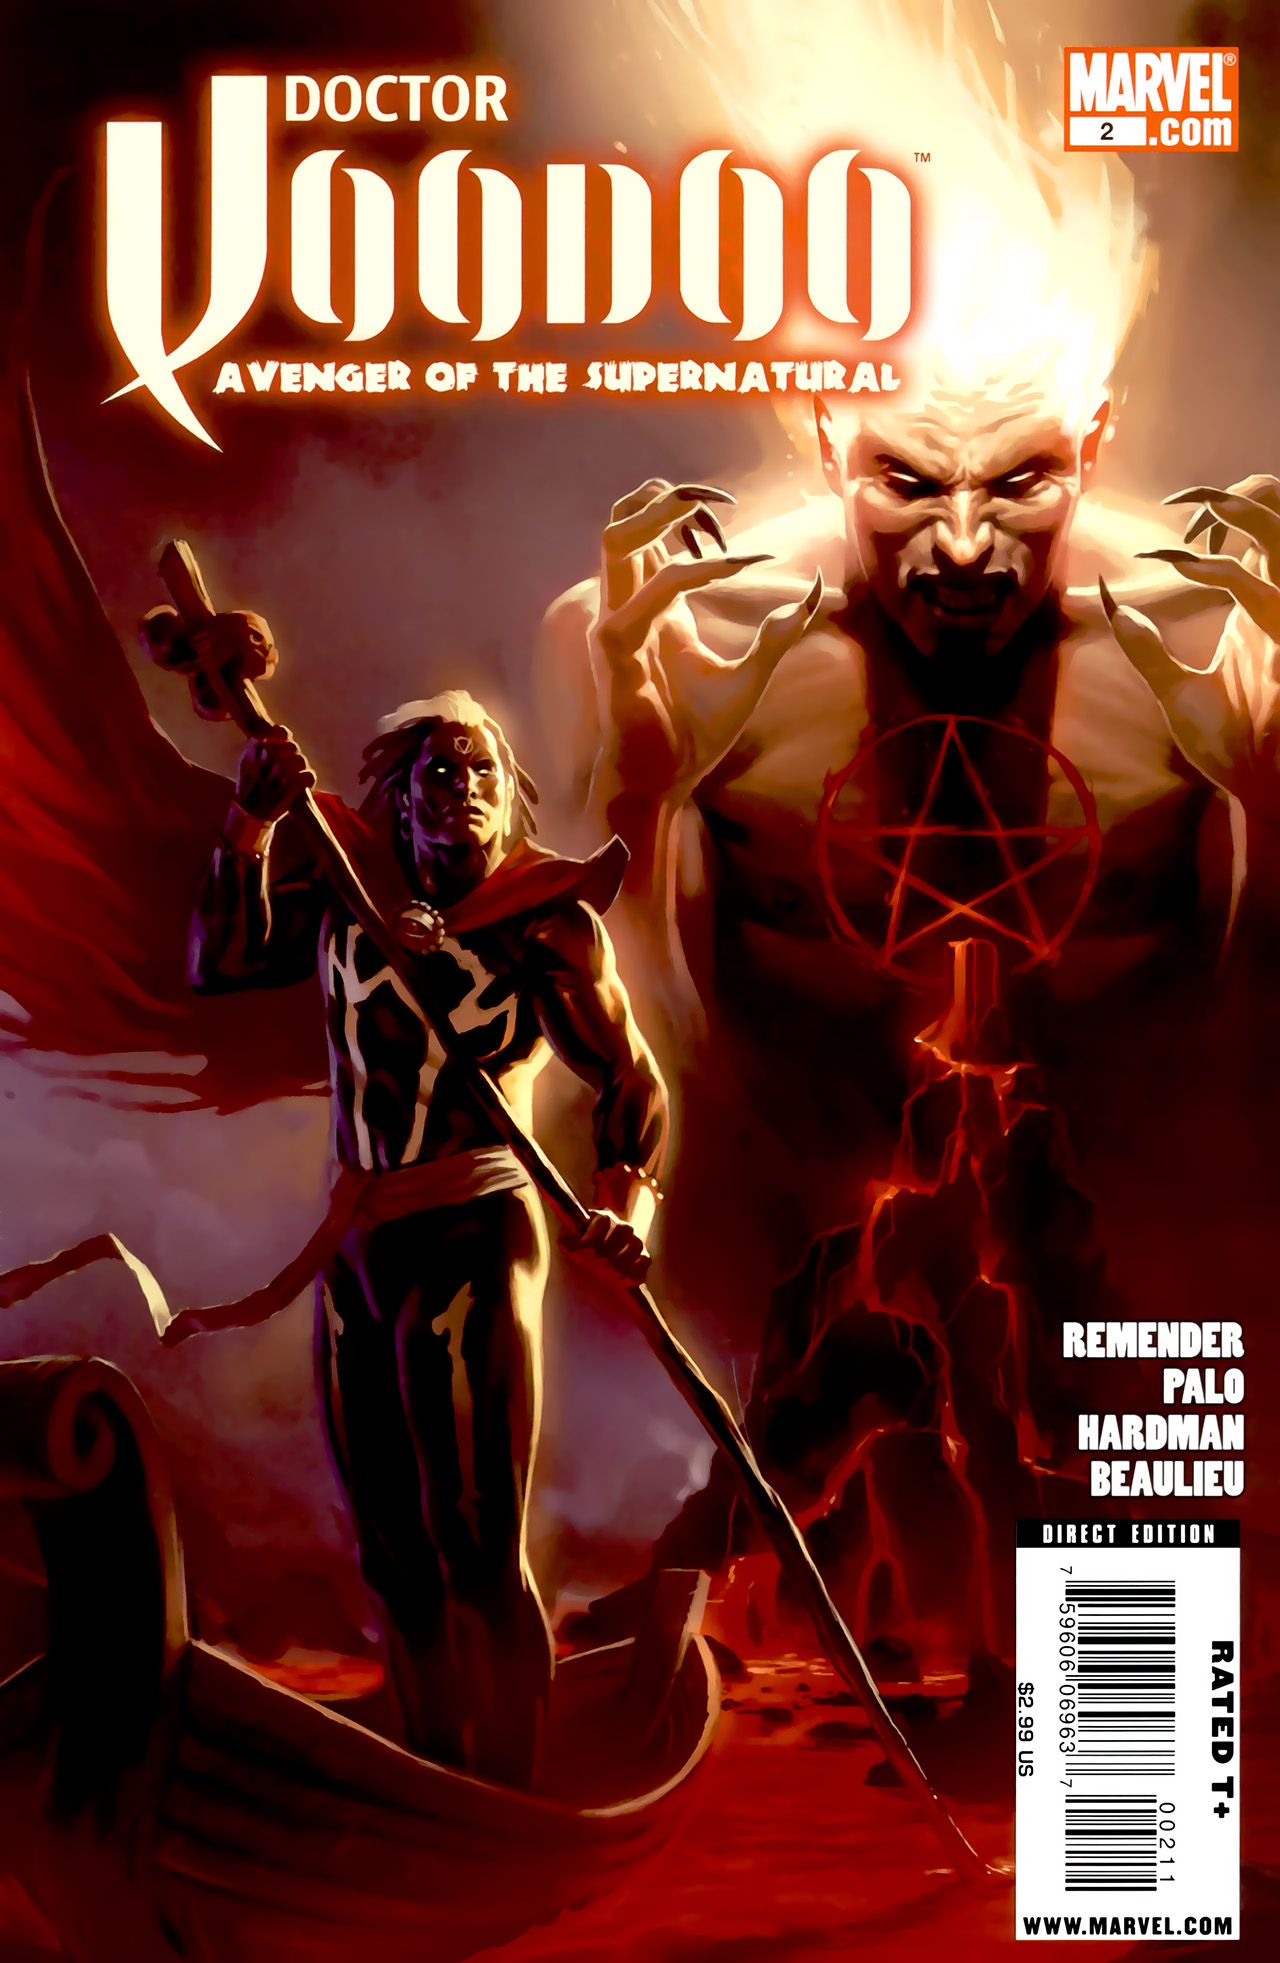 Read online Doctor Voodoo: Avenger of the Supernatural comic -  Issue #2 - 1